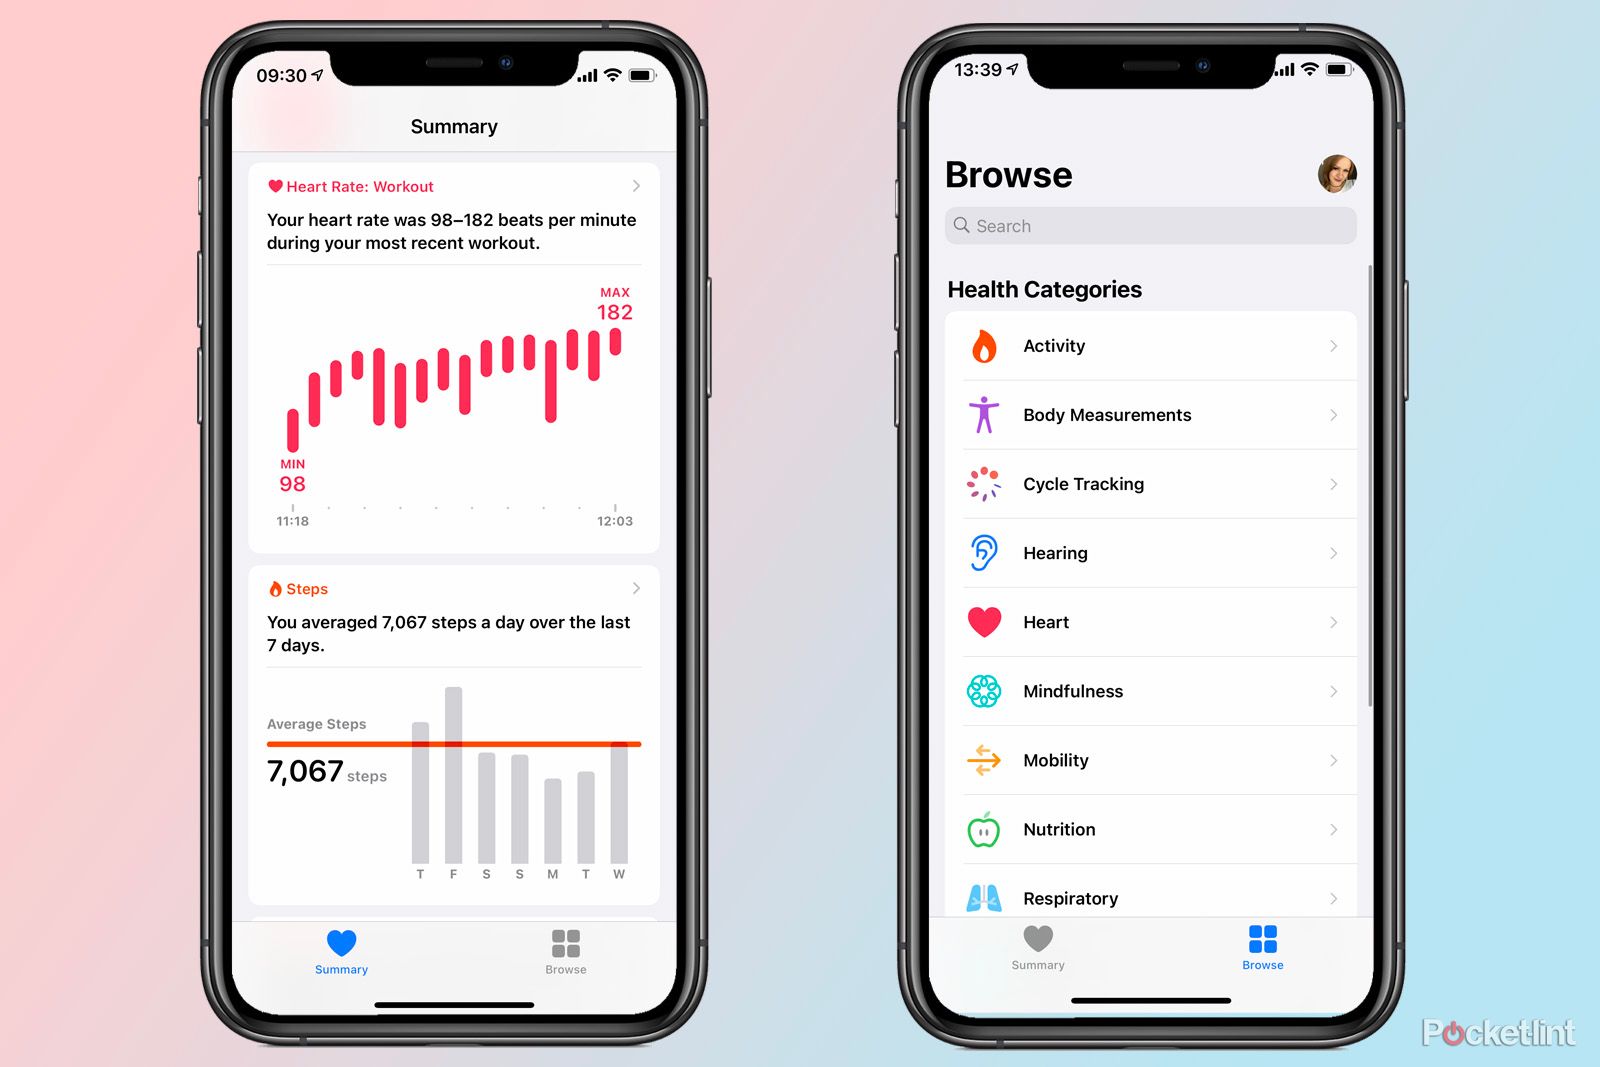 Apple Health app and HealthKit: What are they and how do they work?